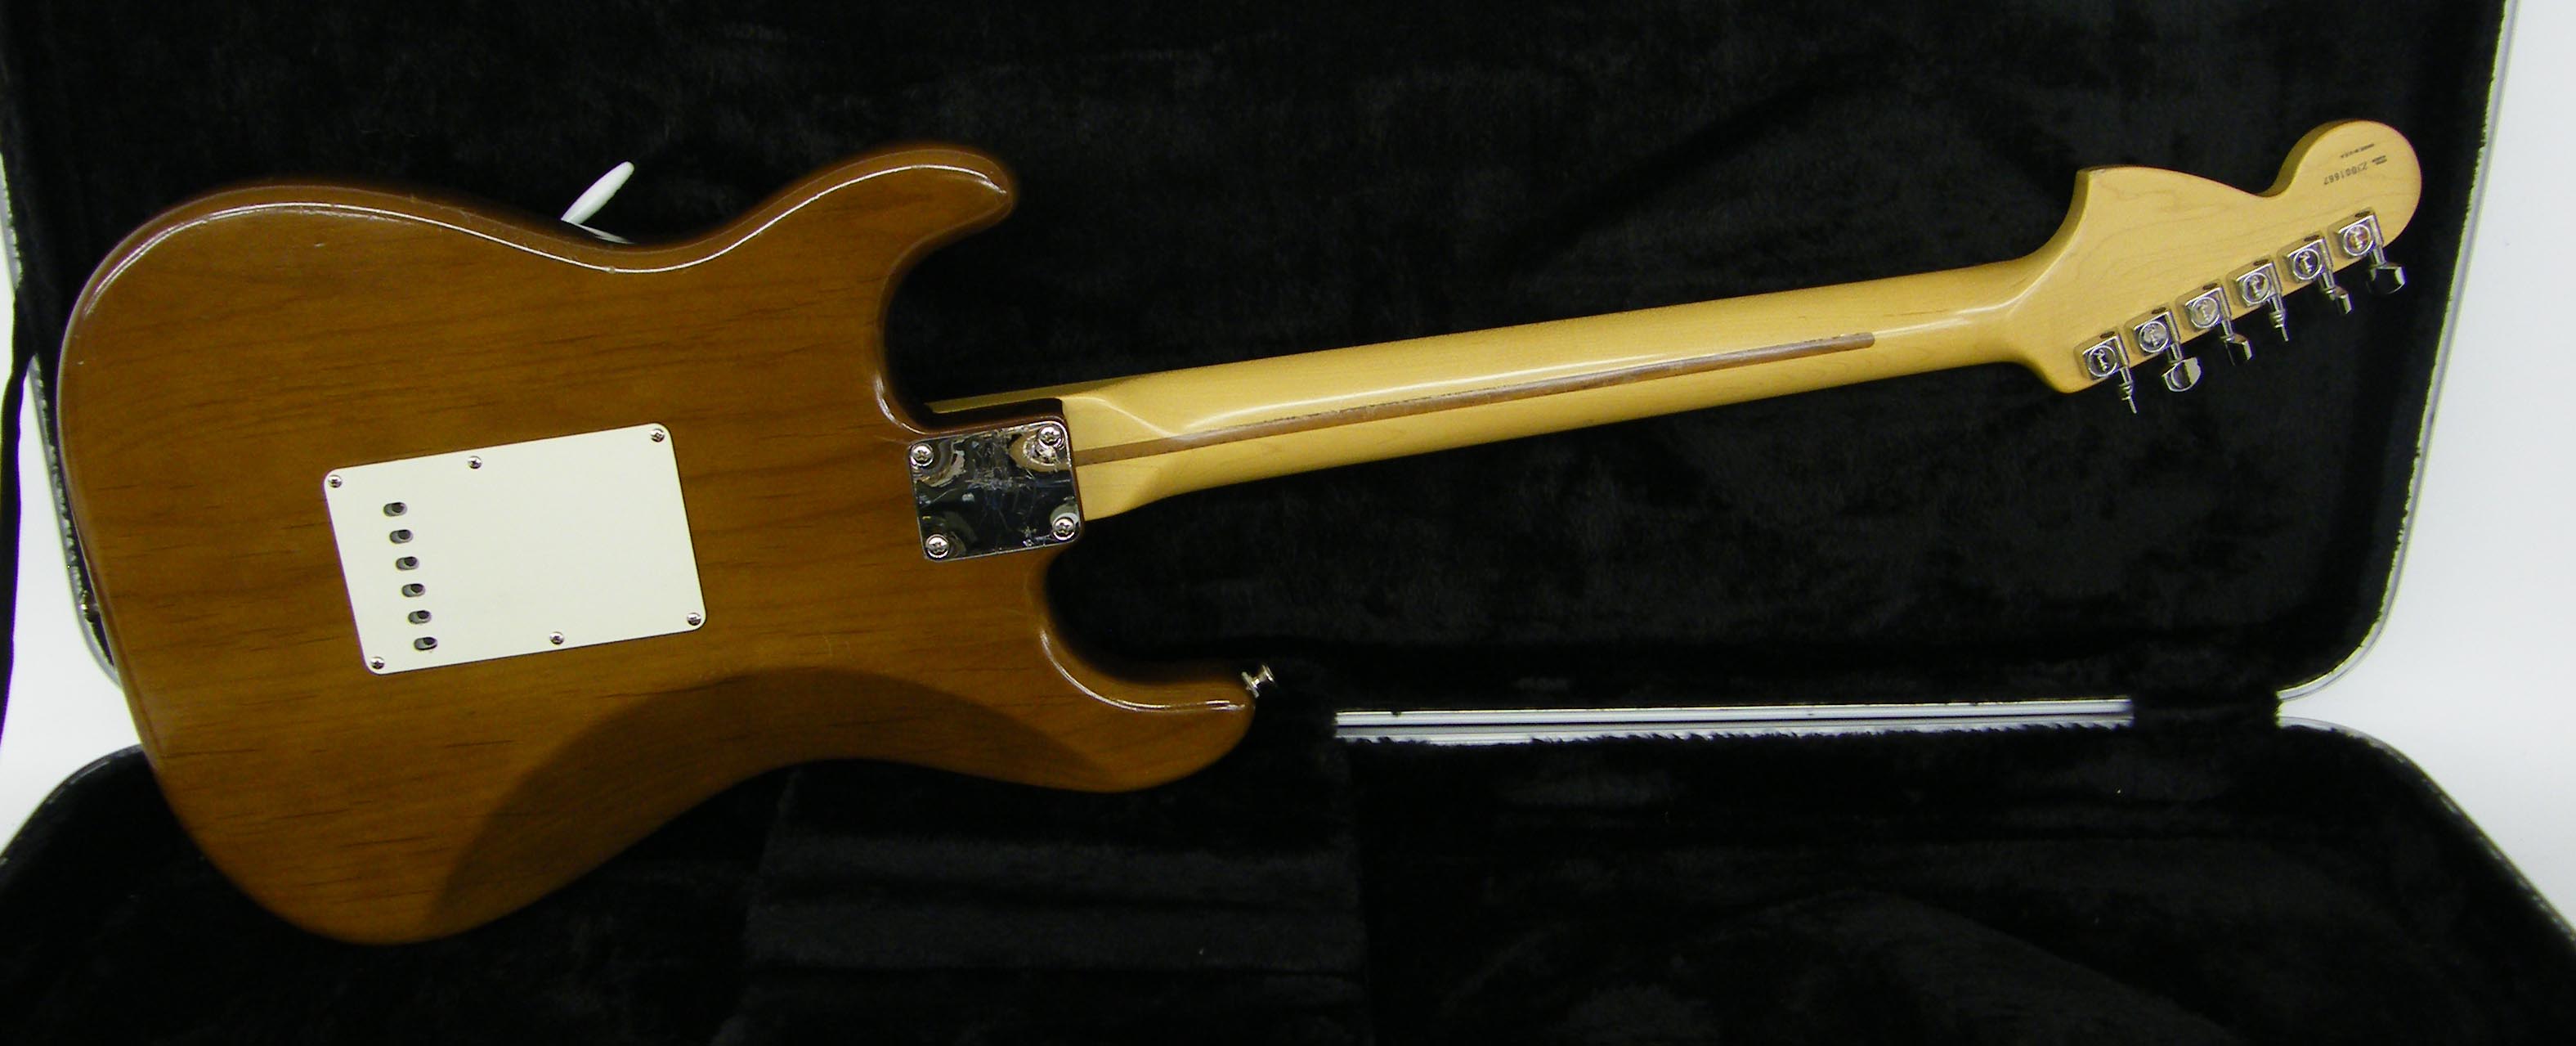 2003 Fender Stratocaster electric guitar, made in USA, ser. no. Z3001667, walnut finish with various - Image 2 of 2